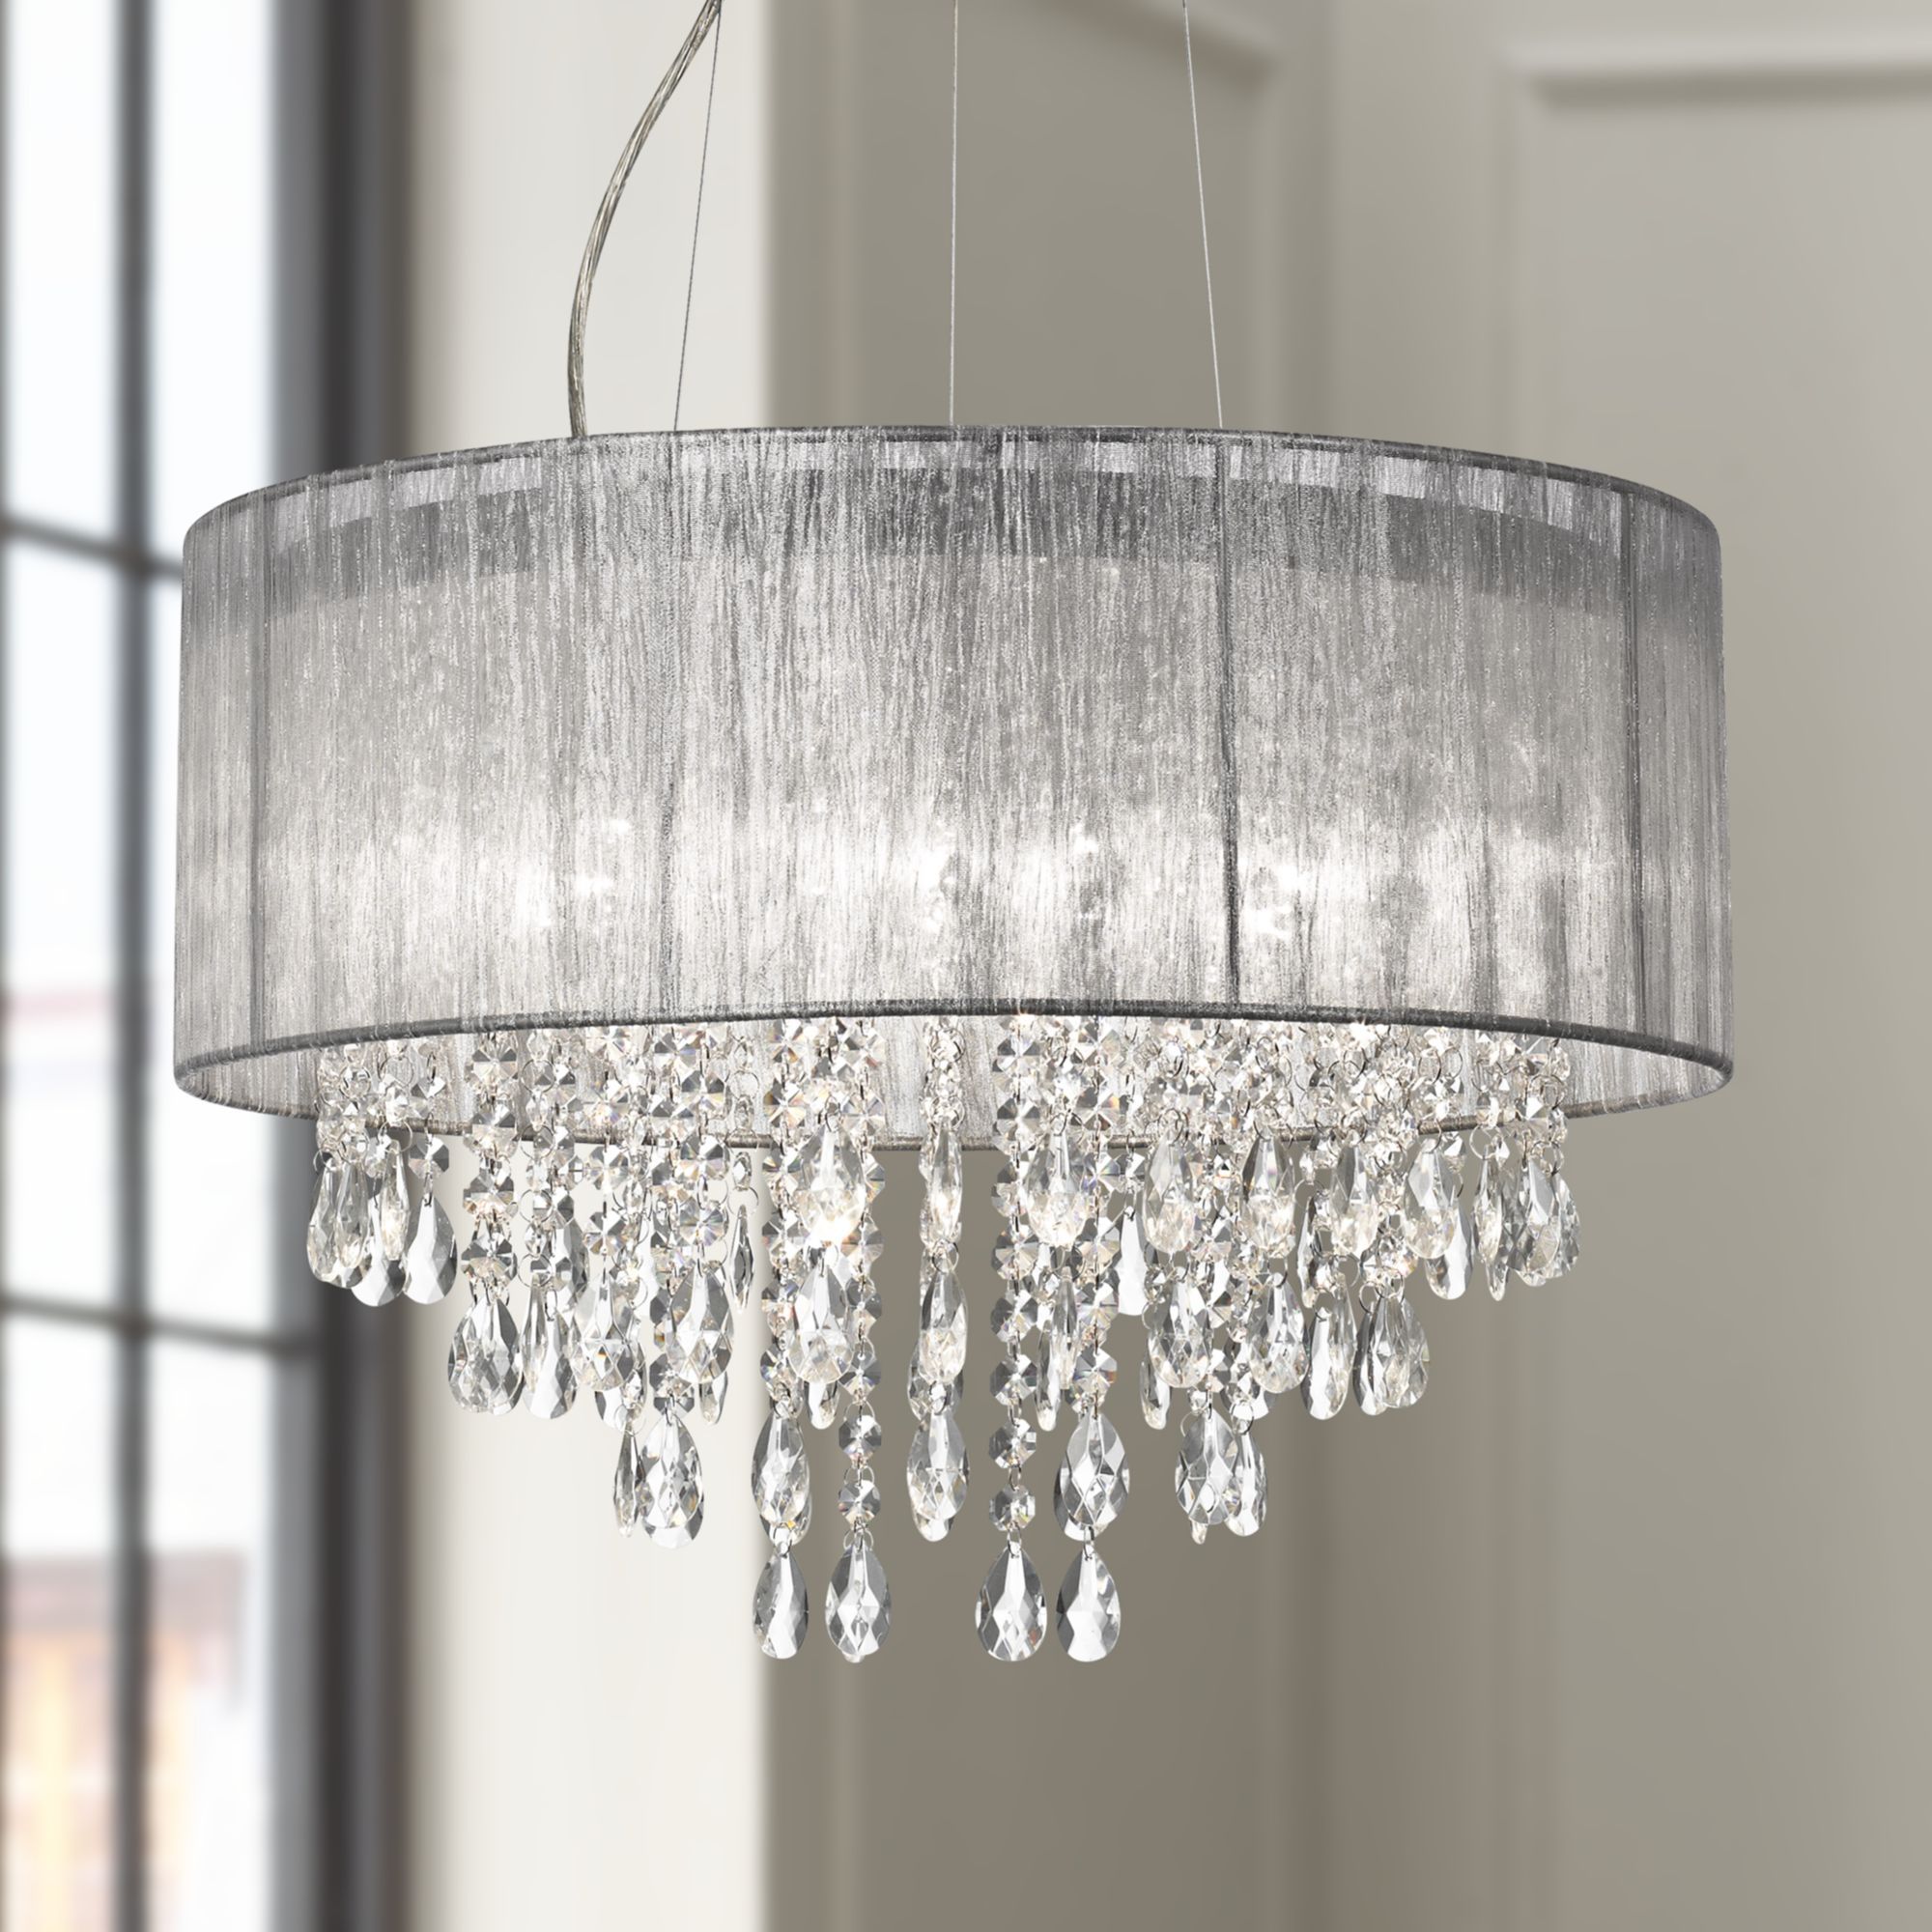 Possini Euro Design Chrome Drum Chandelier 20" Wide Modern Pertaining To Glass And Chrome Modern Chandeliers (View 8 of 15)